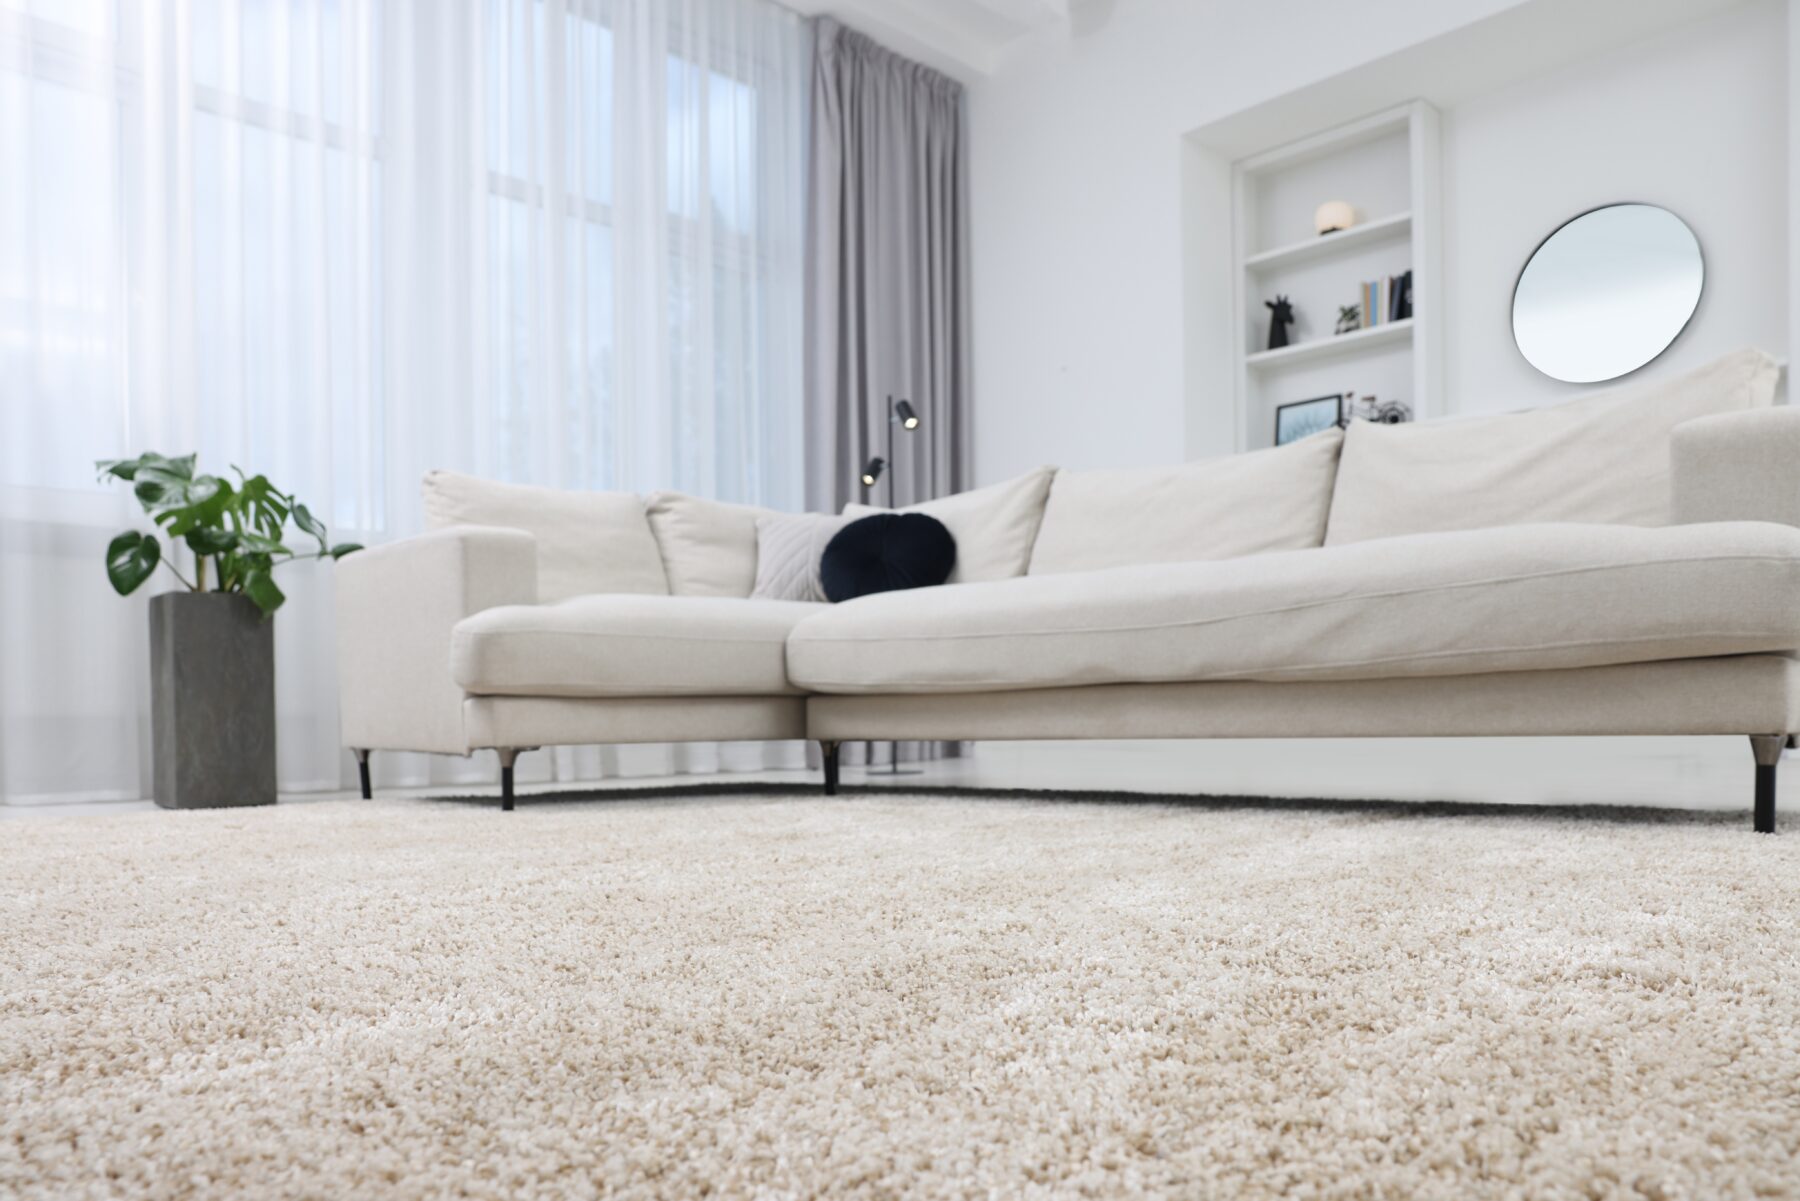 Discover Elegance and Durability at Ever After Flooring – Your Premier Carpet and Flooring Store near Ashton Under Lyne, Manchester